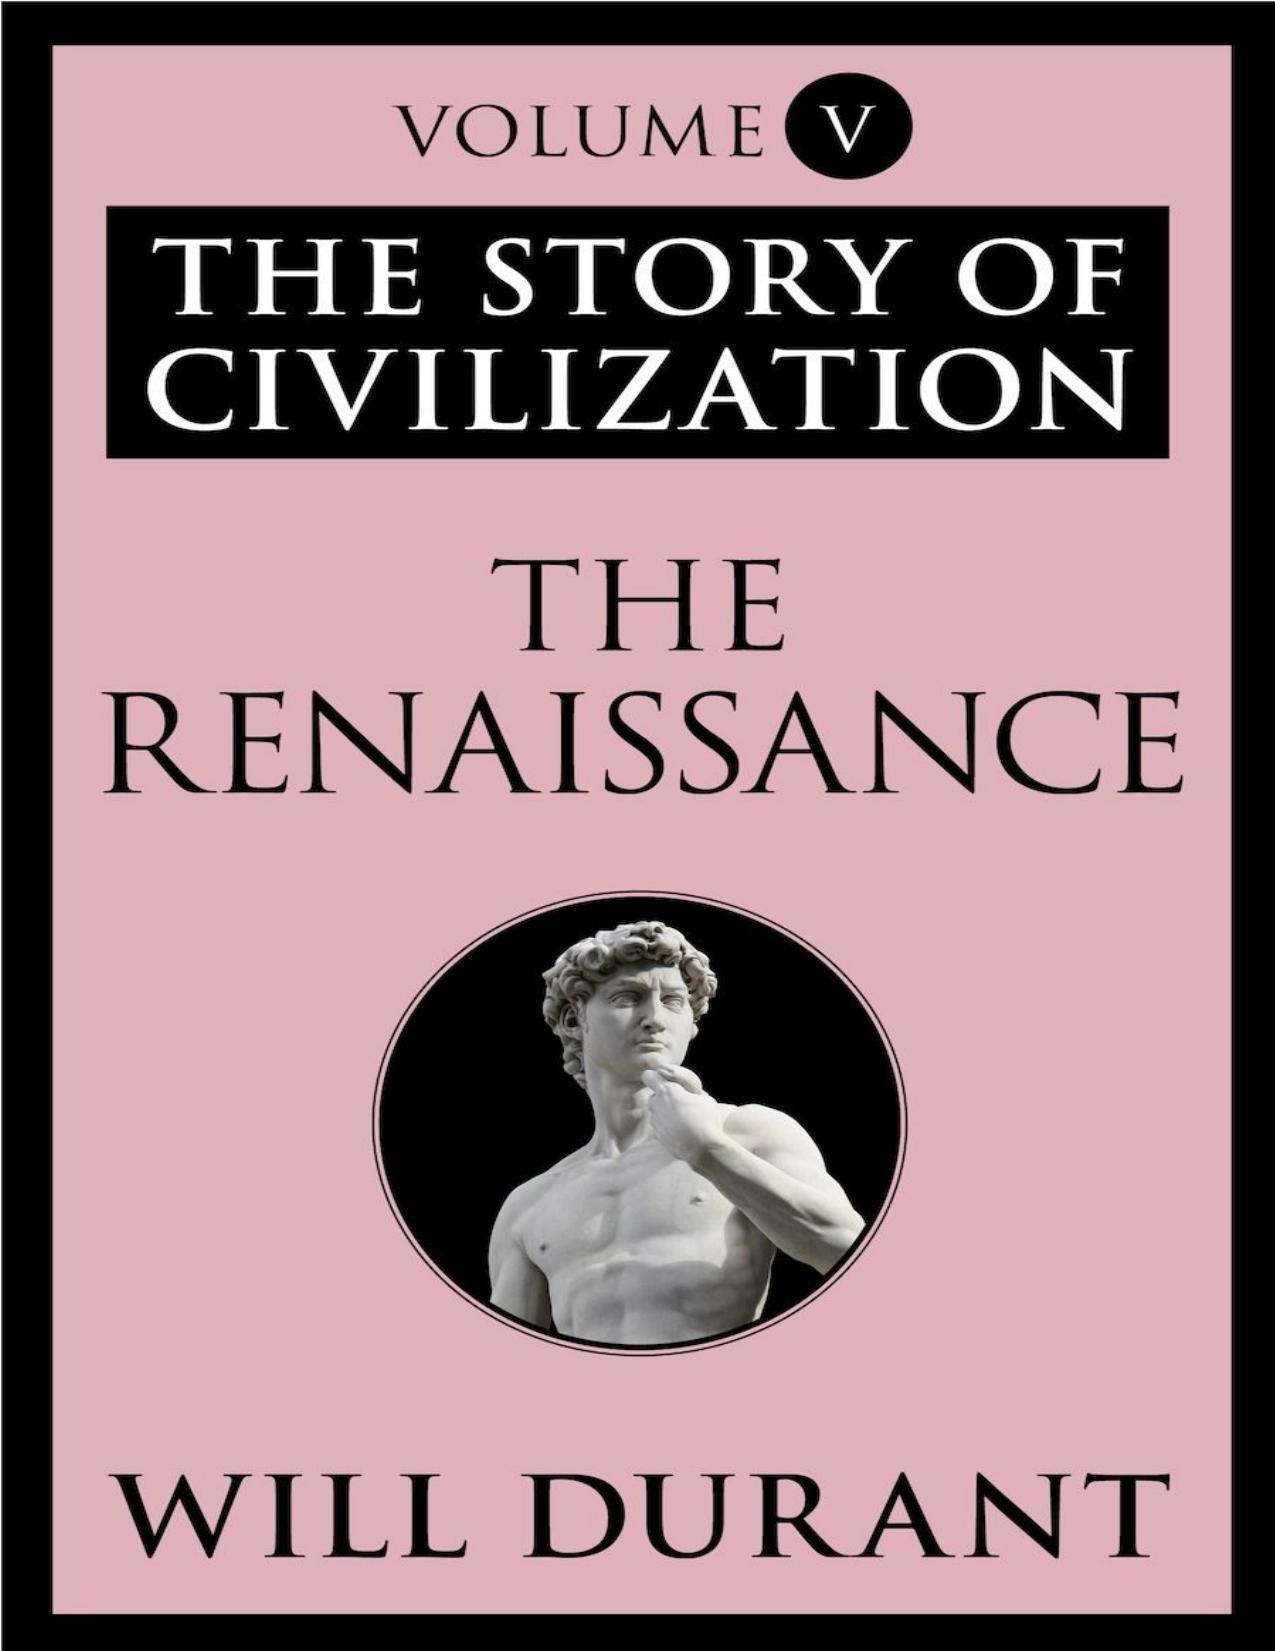 The Renaissance: The Story of Civilization by Will Durant